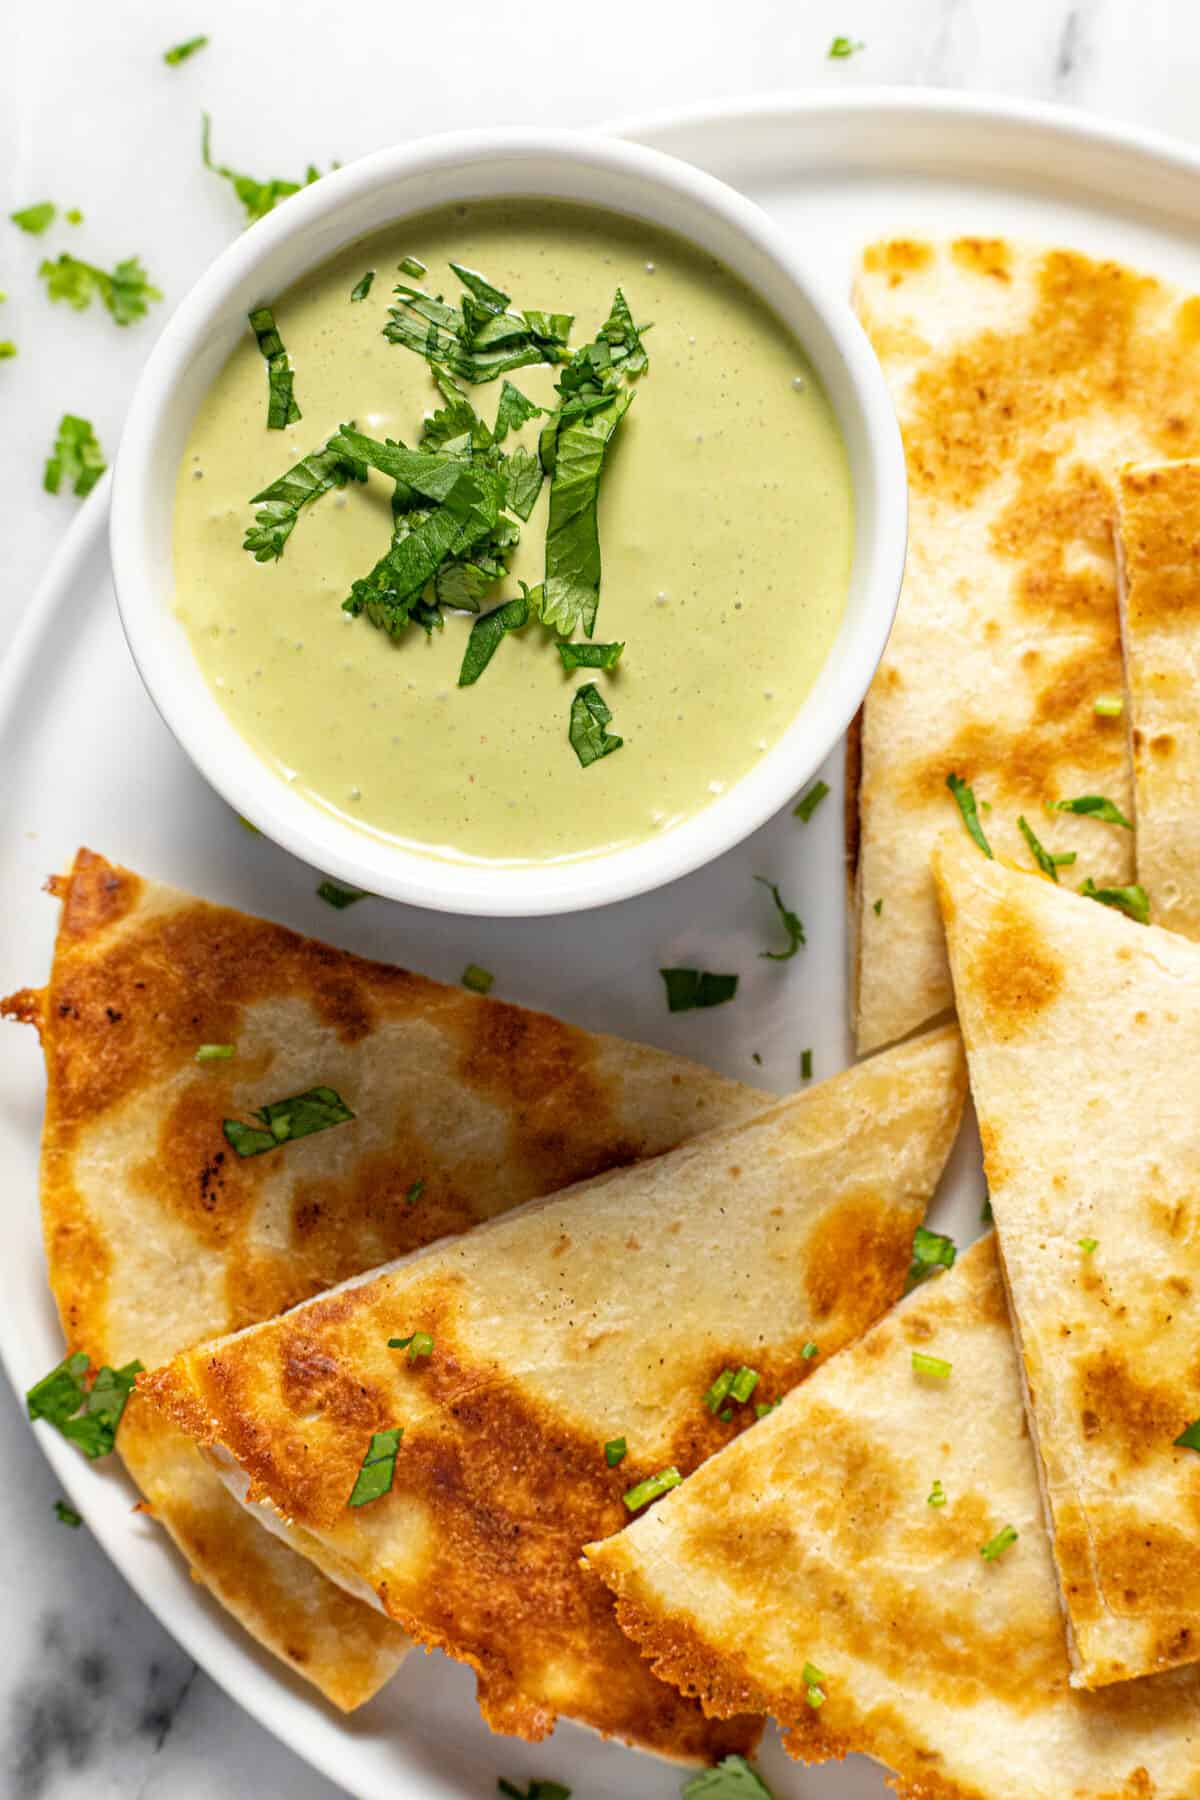 Small white bowl filled with cilantro lime sauce on a plate with quesadillas.